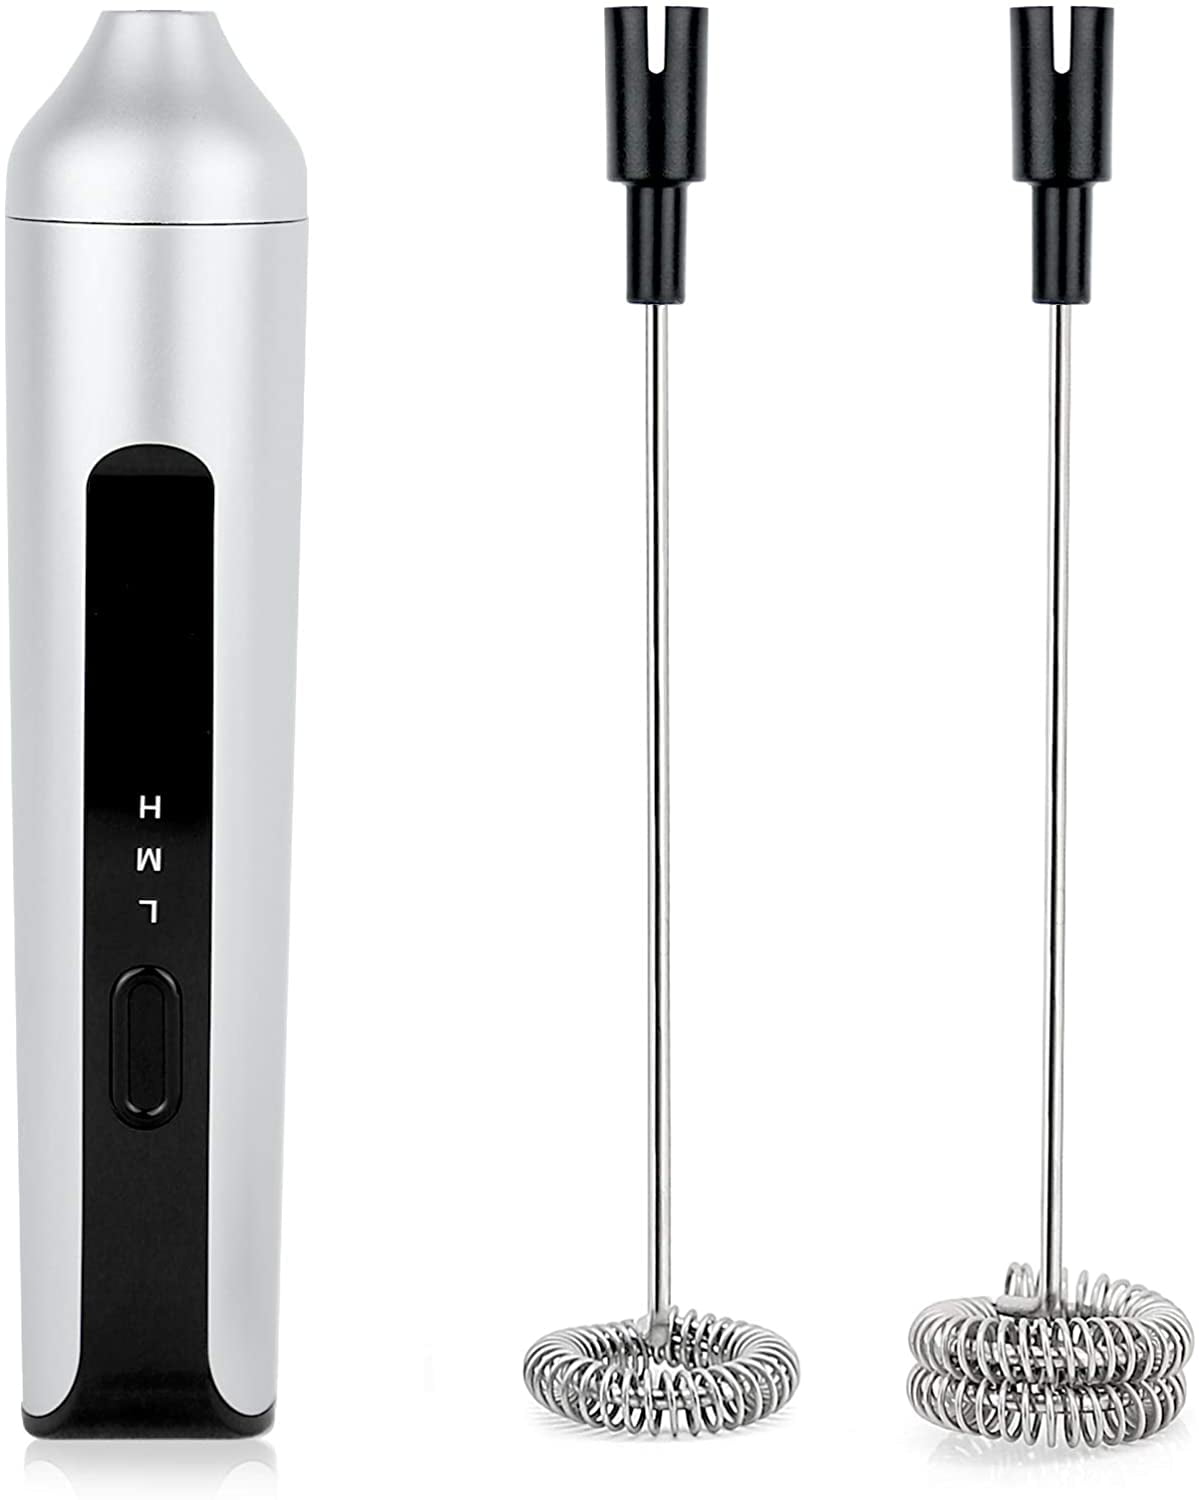  VENTUCI Stainless Steel Milk Frother Handheld Foaming Wand  whips up Smooth, Creamy Milk Foam in seconds. Creates Gourmet Espresso  Coffee drinks at home, Best Gift: Home & Kitchen